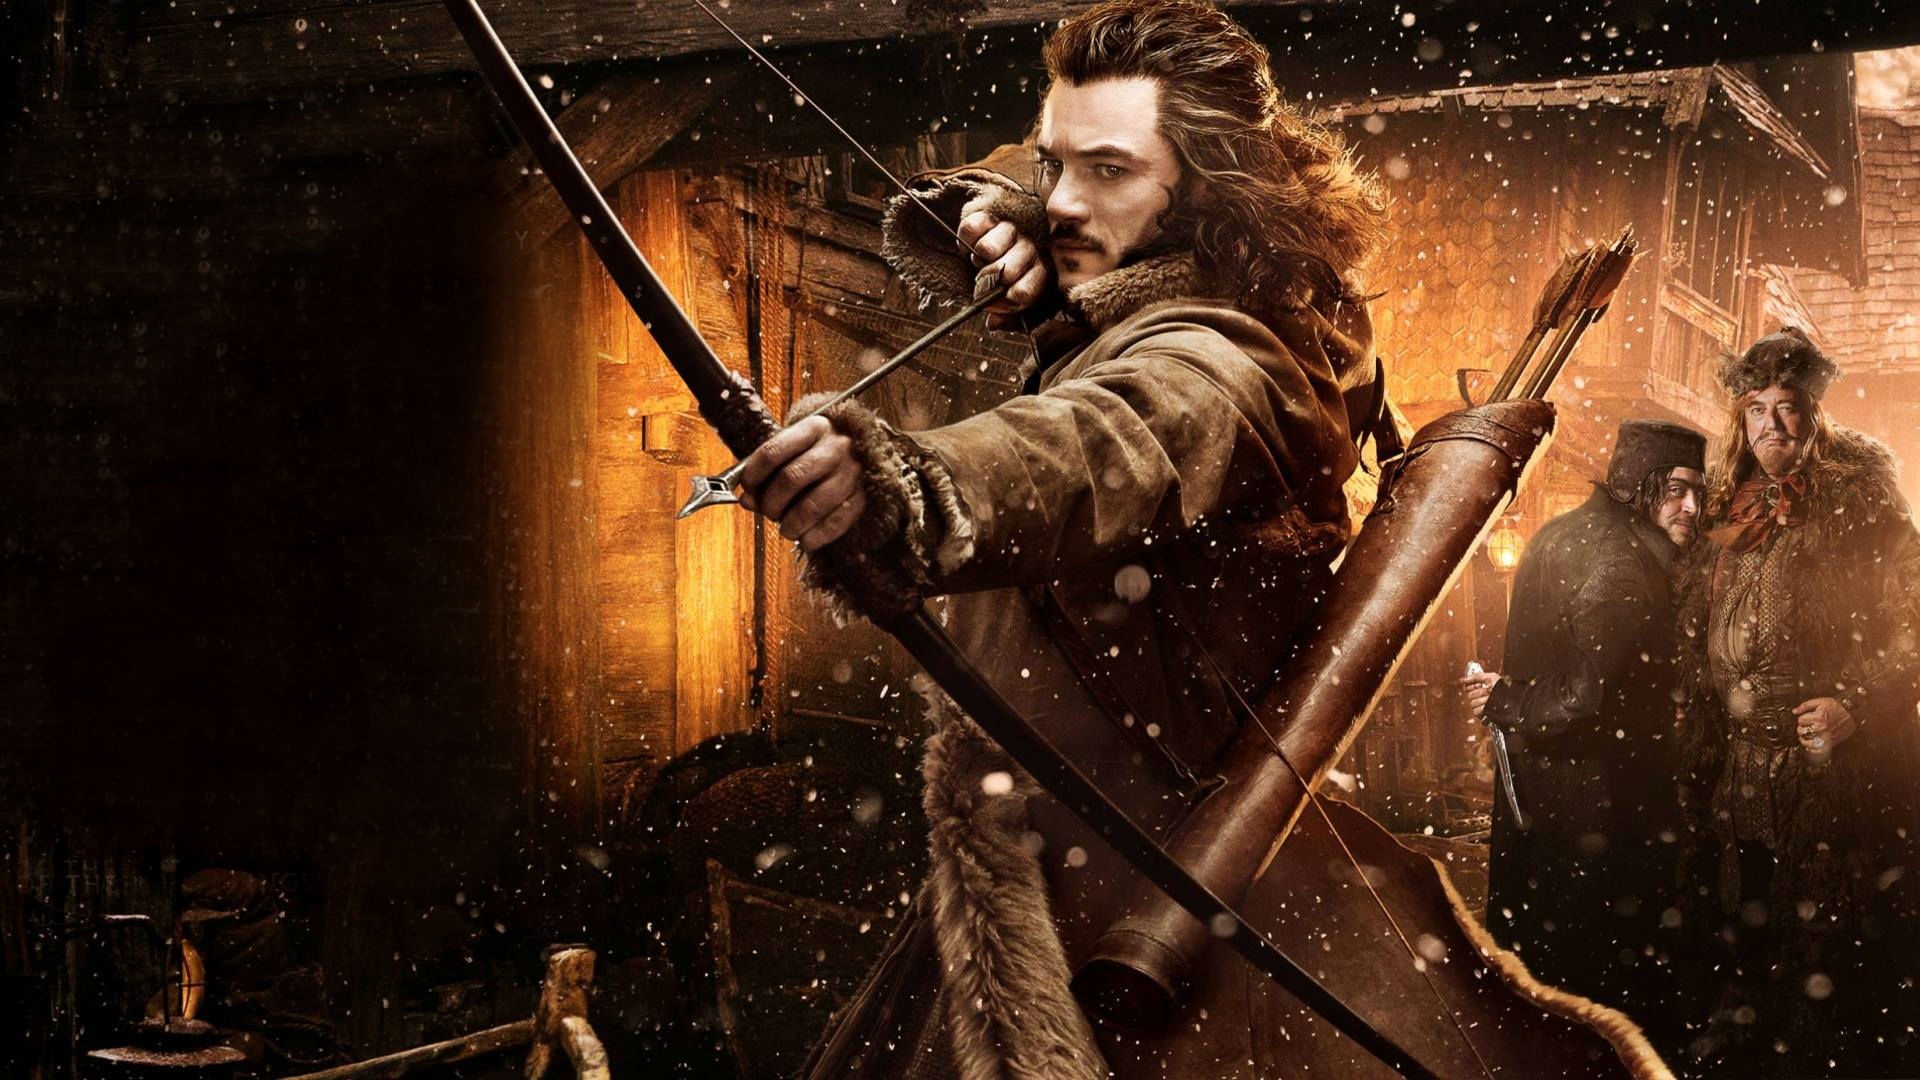 Lord of the Rings, The Hobbit, Bow and arrow, Luke Evans' Bard, 1920x1080 Full HD Desktop